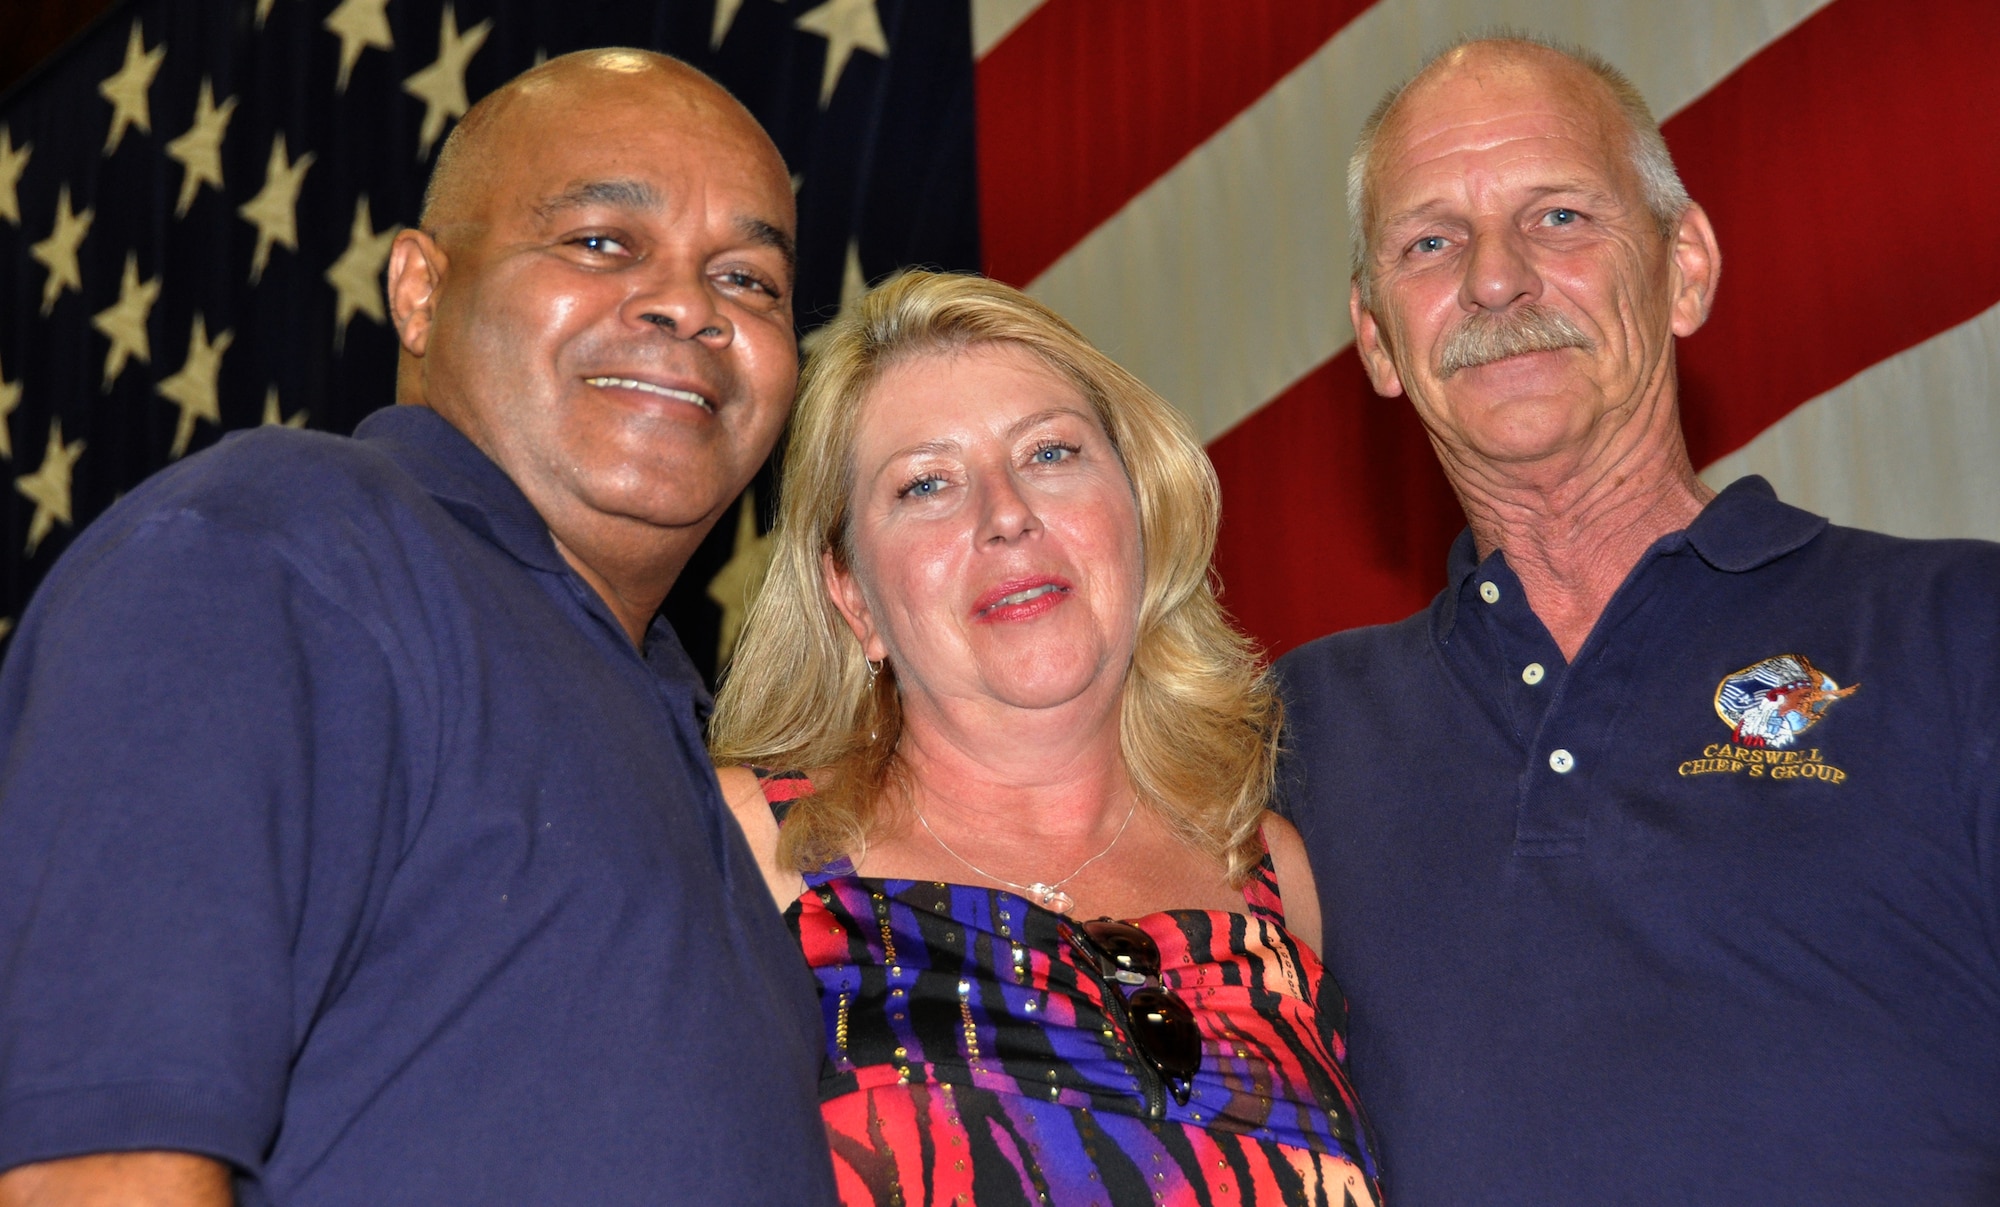 Left to right, Retired Chief Master Sgt. Bob Murphy, Chief Master Sgt. Michele Ozuna and Retired Chief Master Sgt. Ron Carroll are all smiles at the 73rd Aerial Port Squadron's 40th Anniversary celebration Aug. 6, 2011, at Naval Air Station Joint Reserve Base, Texas.  Ozuna is the current superintendent of the squadron while Murphy and Carroll are former superintendents.  (U.S. Air Force photo/Lt. Col. David Kurle)